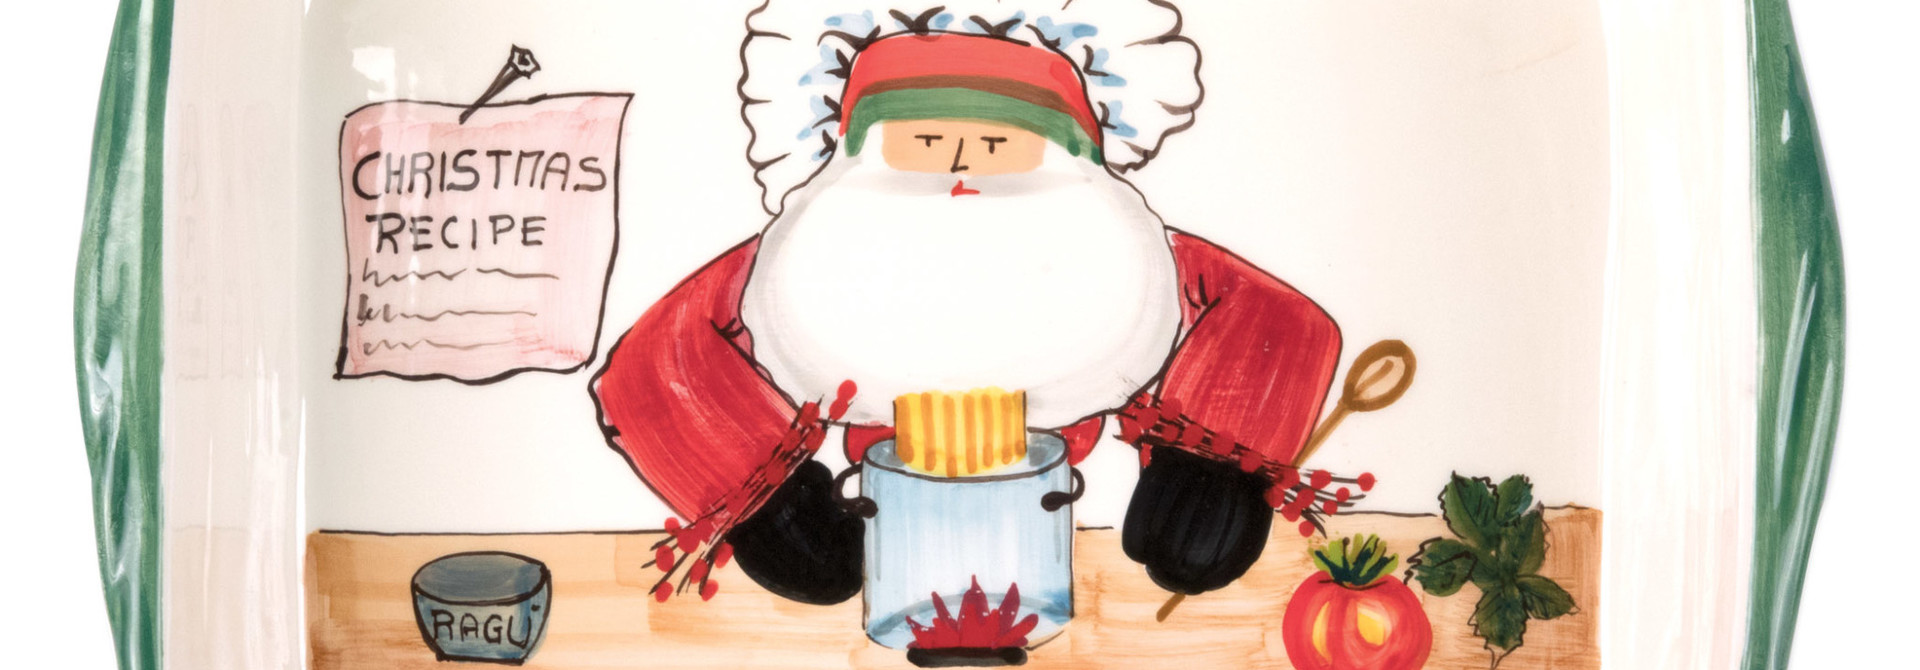 Old St. Nick | The Bakeware Collection